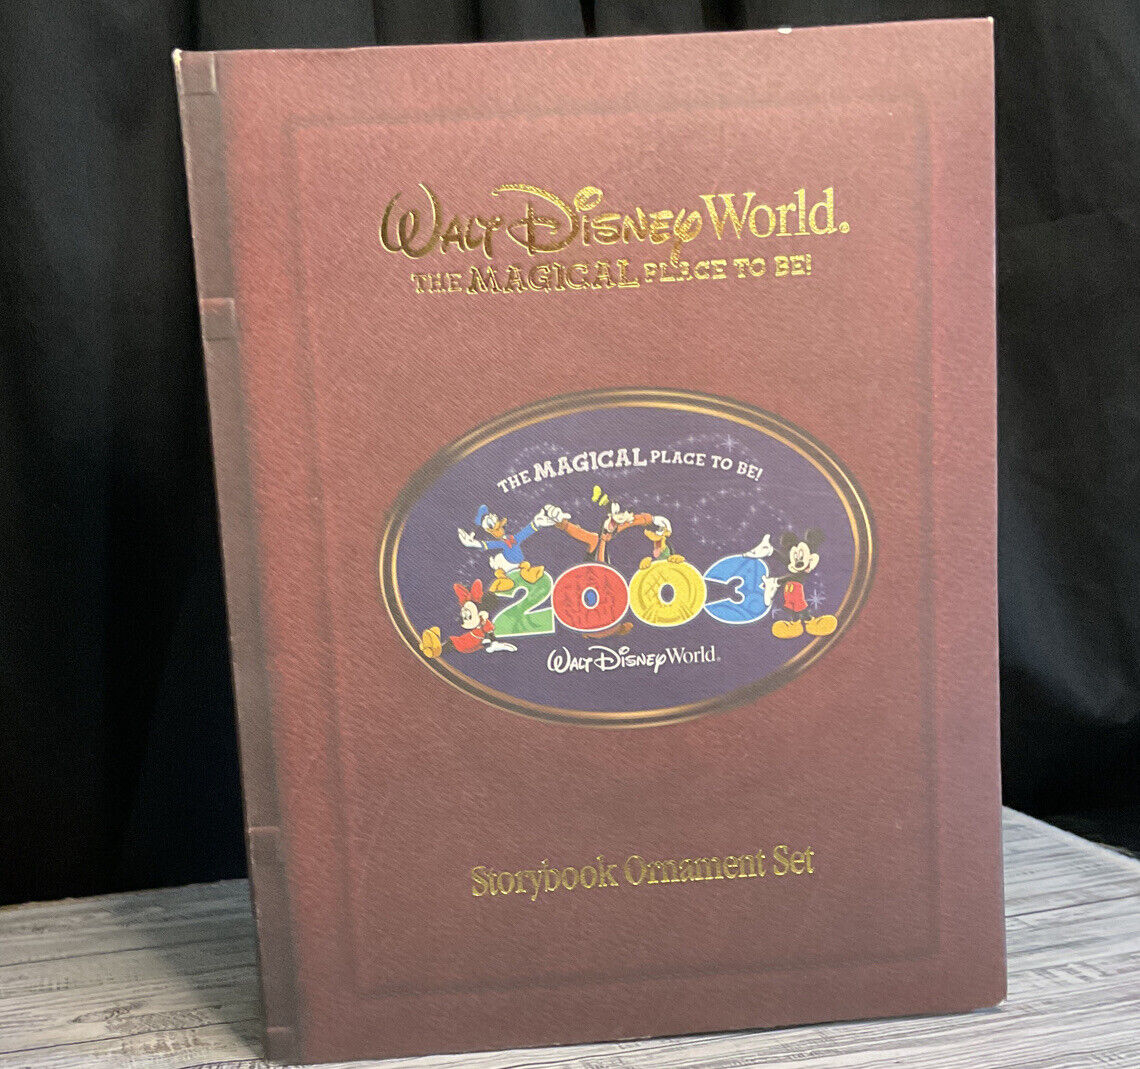 Walt Disney World ‘The Magical Place To Be 2003 Storybook Ornament Set